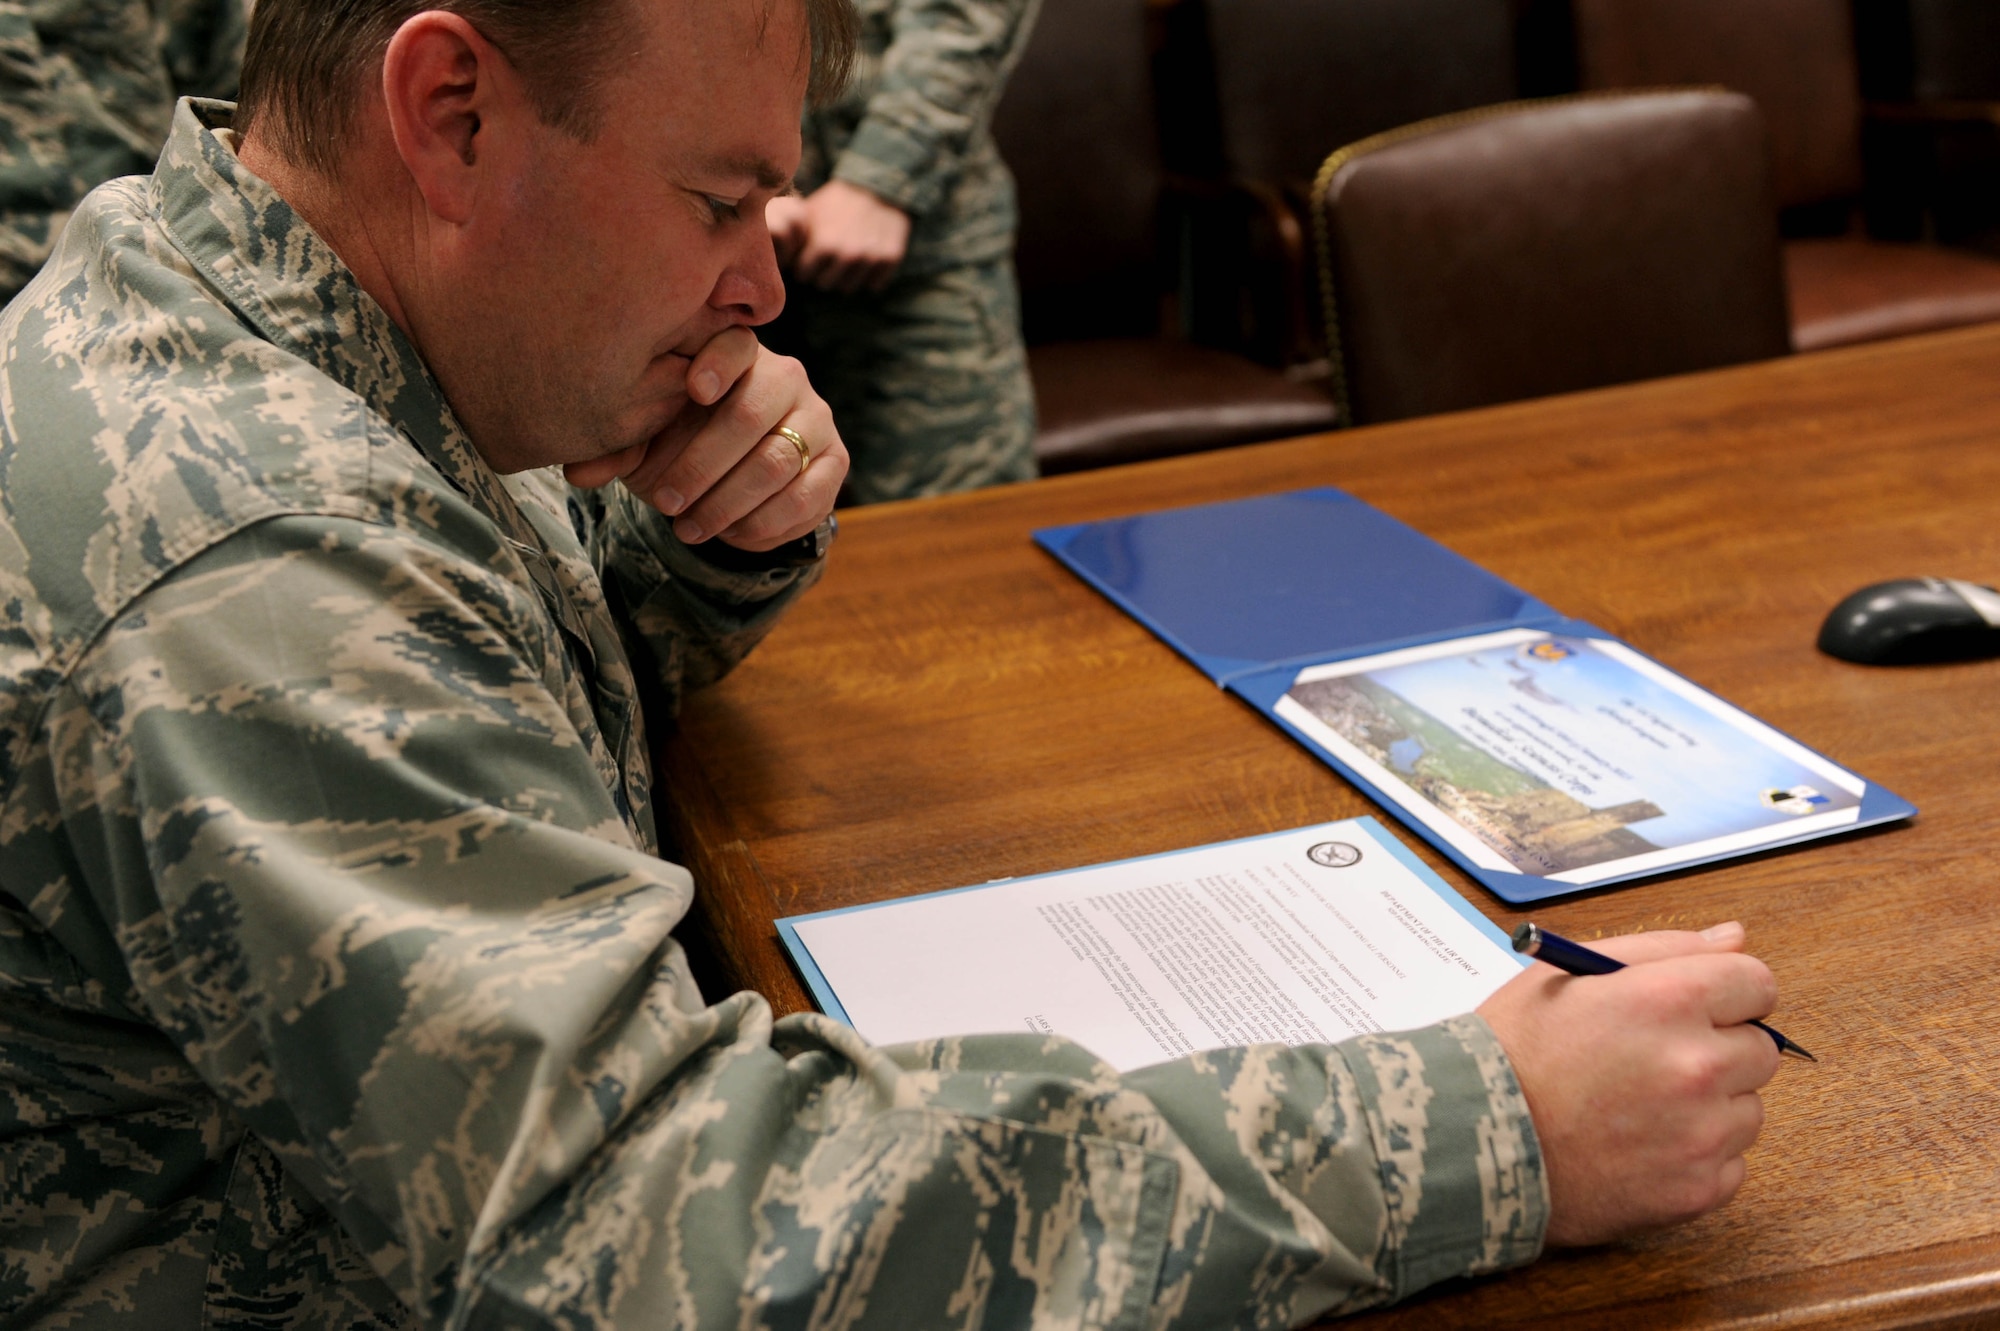 U.S. Air Force Col. Lars Hubert, 52nd Fighter Wing acting commander, reads a declaration of Biomedical Science Corps Week during a signing ceremony in the wing conference room at Spangdahlem Air Base, Germany, Jan. 21, 2015. The BSC, composed of 15 medical career fields, marks its 50th anniversary this year. (U.S. Air Force photo by Airman 1st Class Timothy Kim/Released)